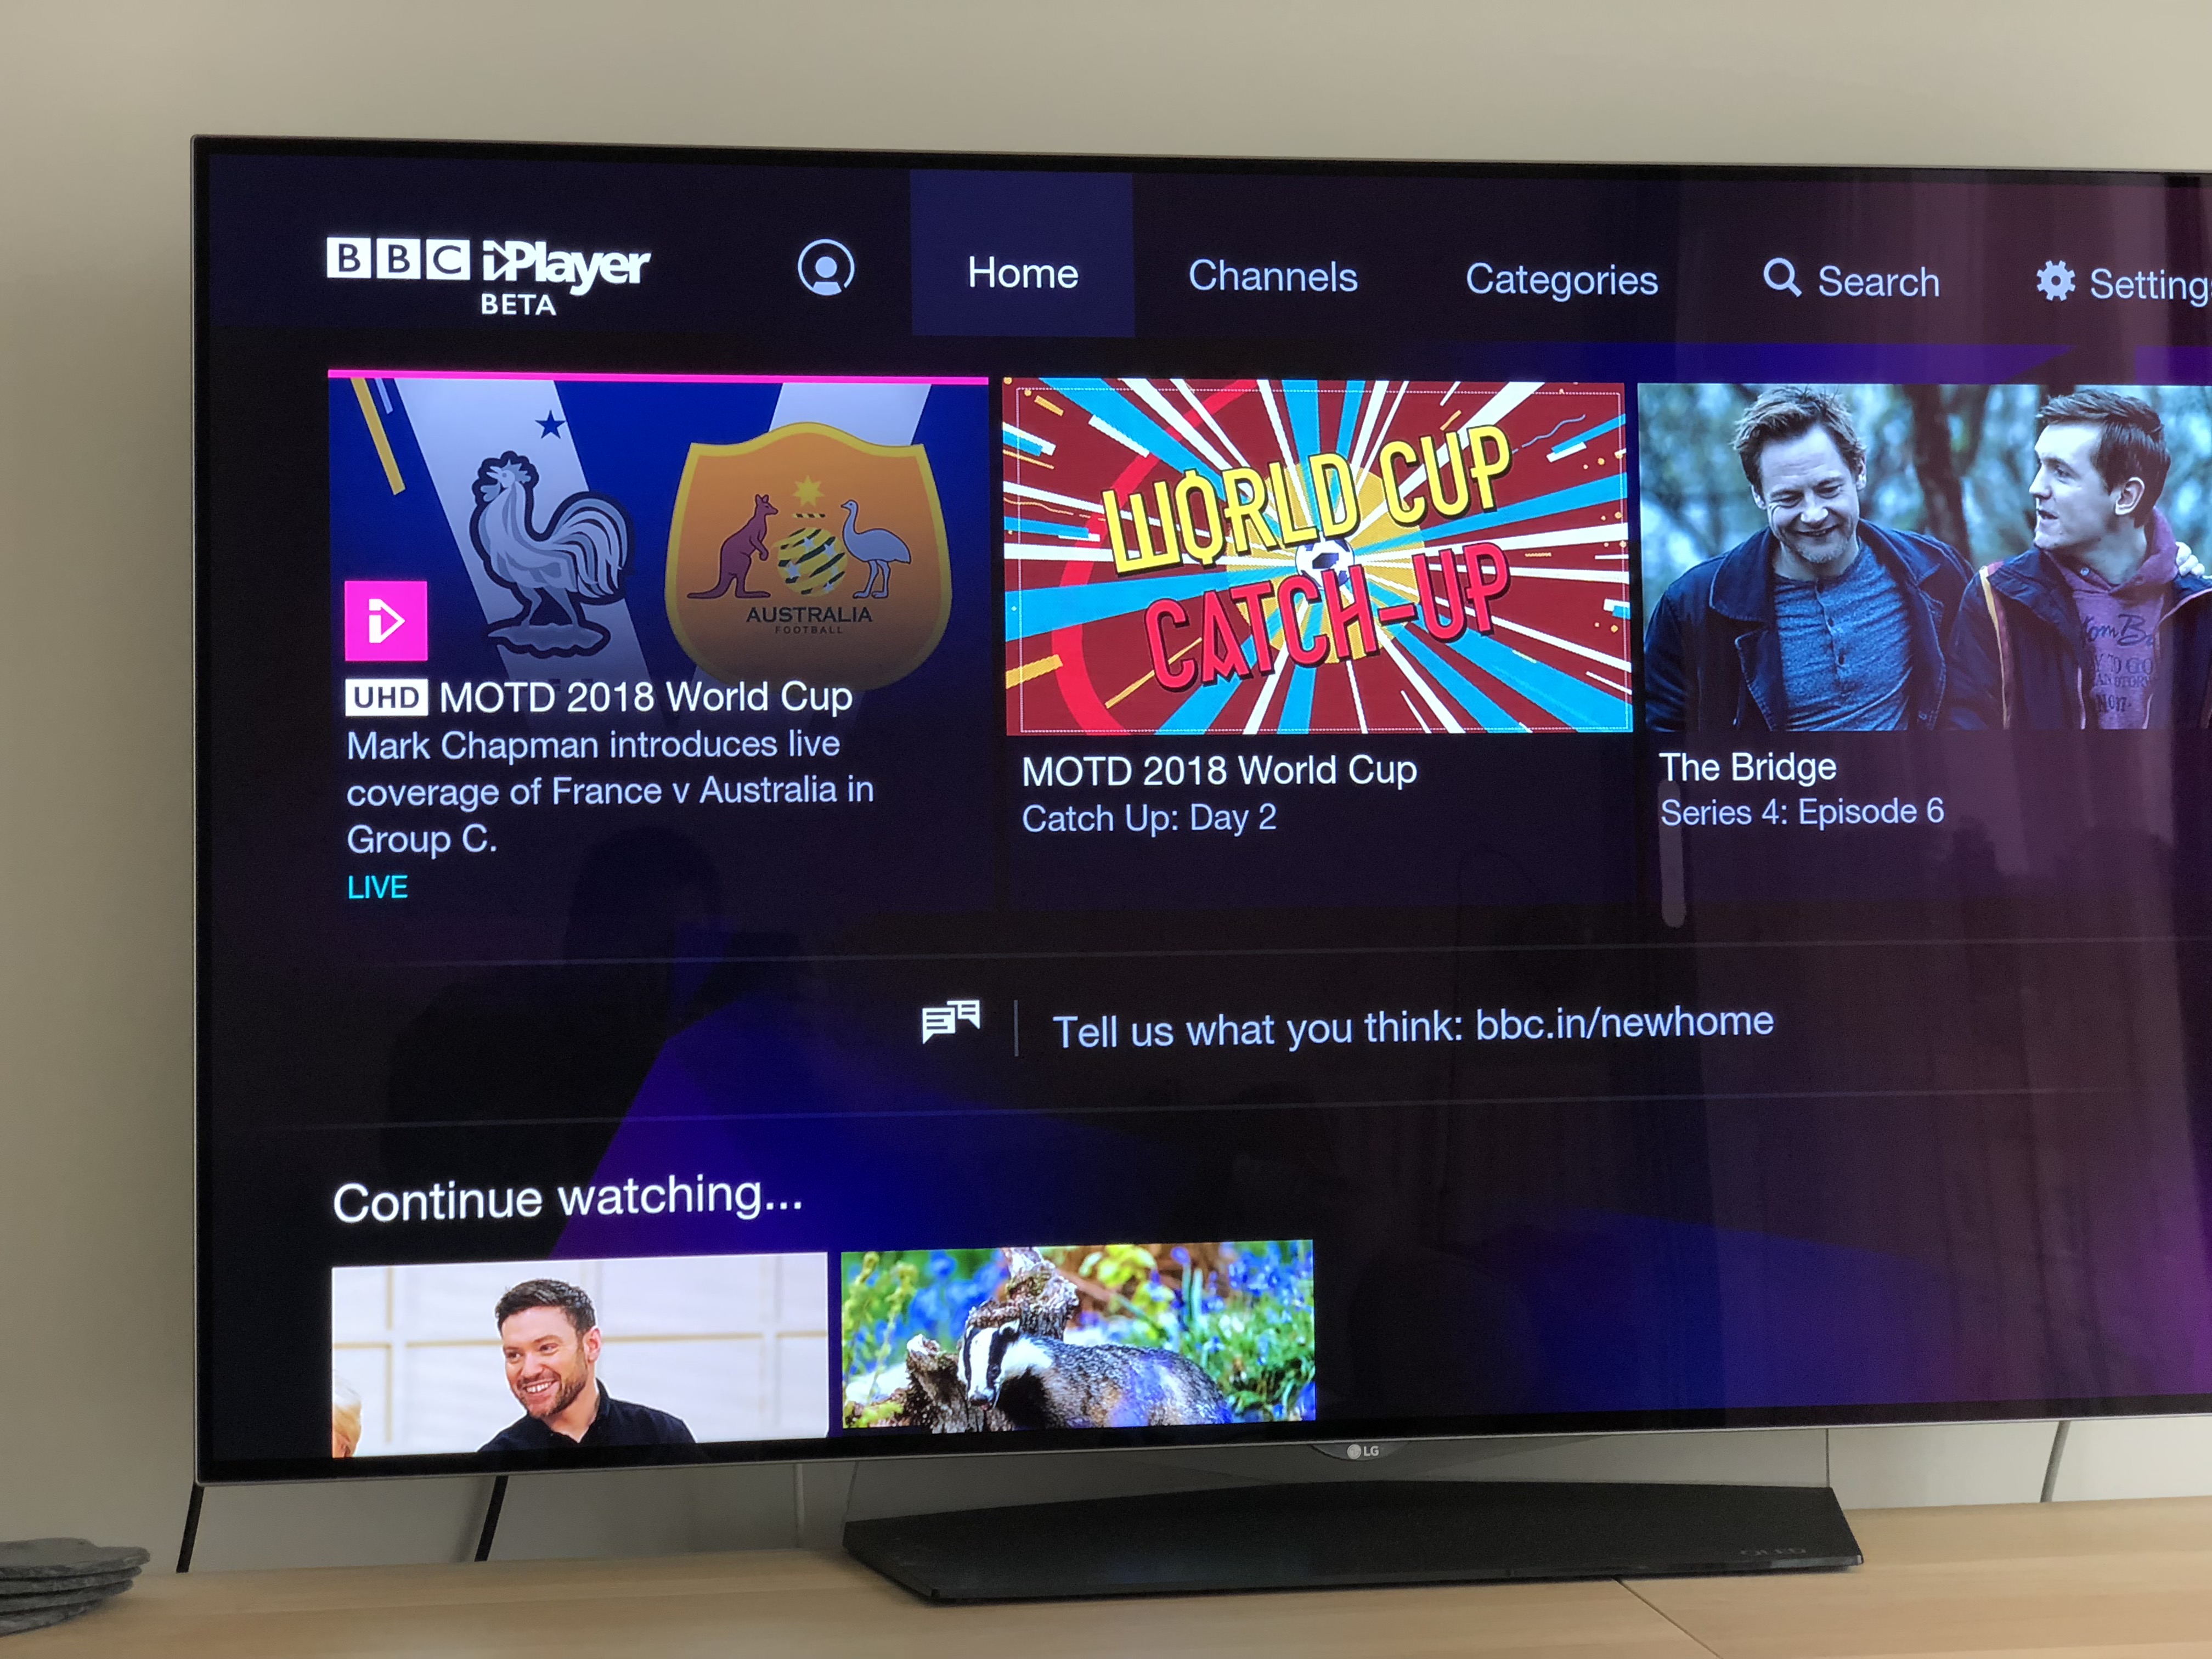 How to watch (and where to find) the World Cup in 4k UHD on BBC iPlayer in the UK